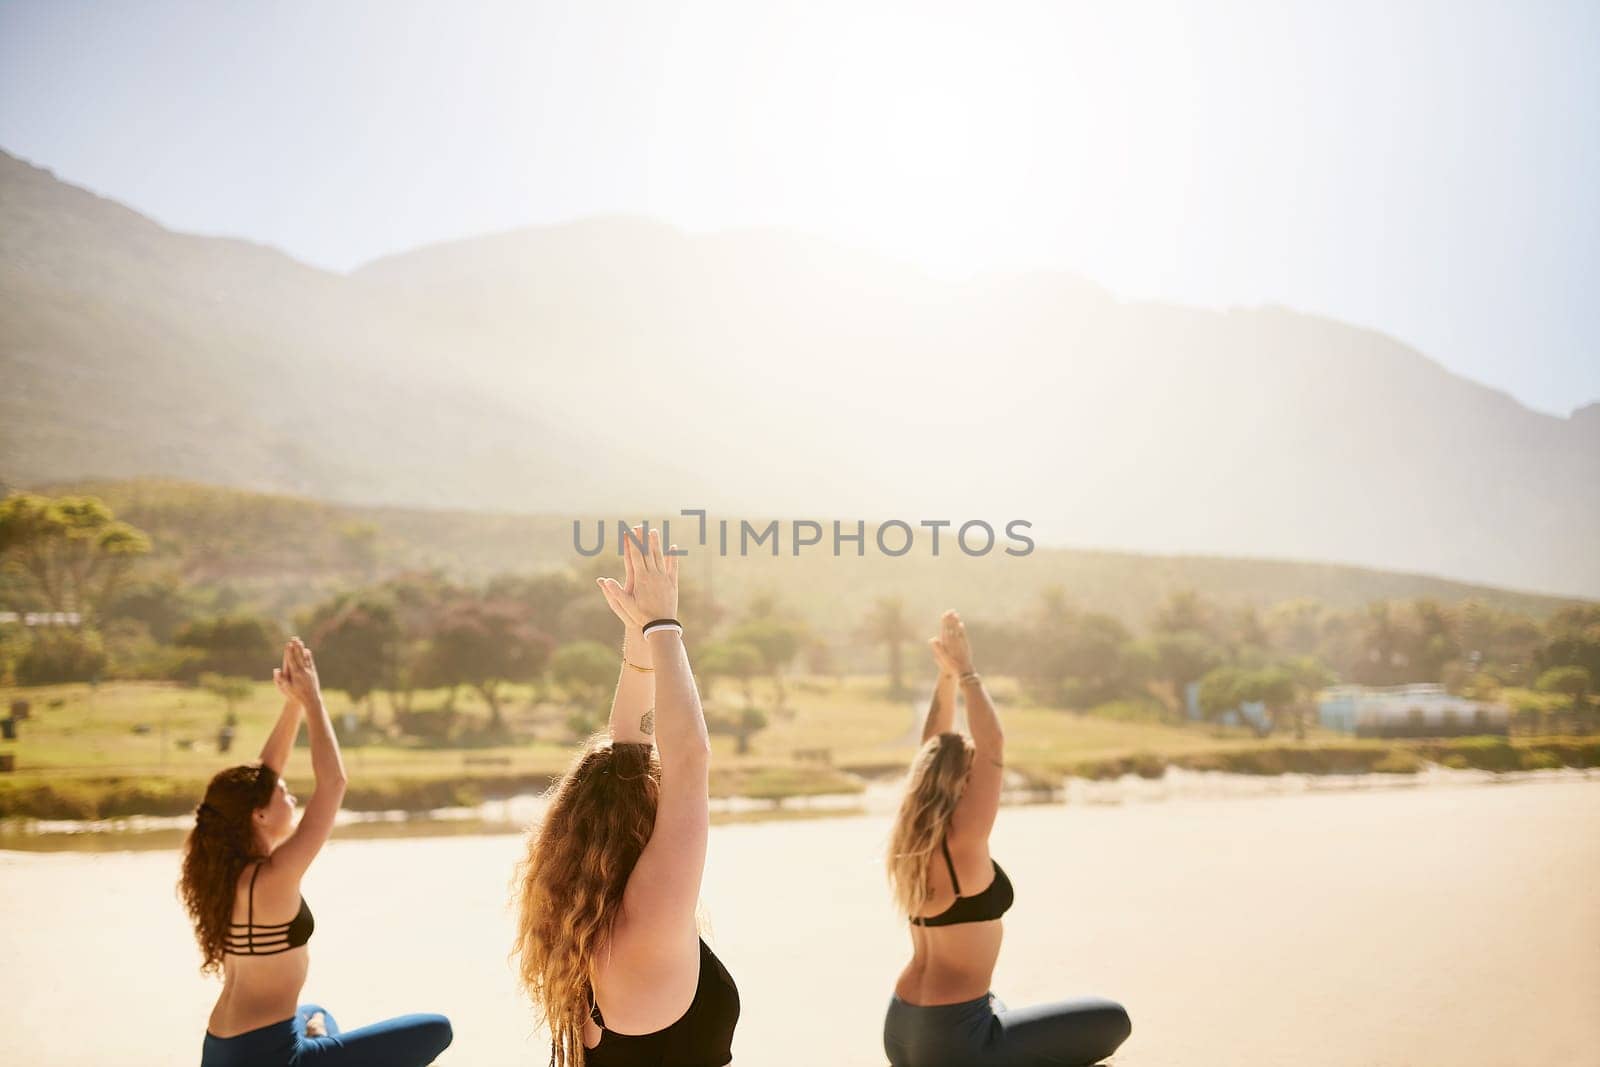 Yoga gives you the means to develop patience. three young women practising yoga on the beach